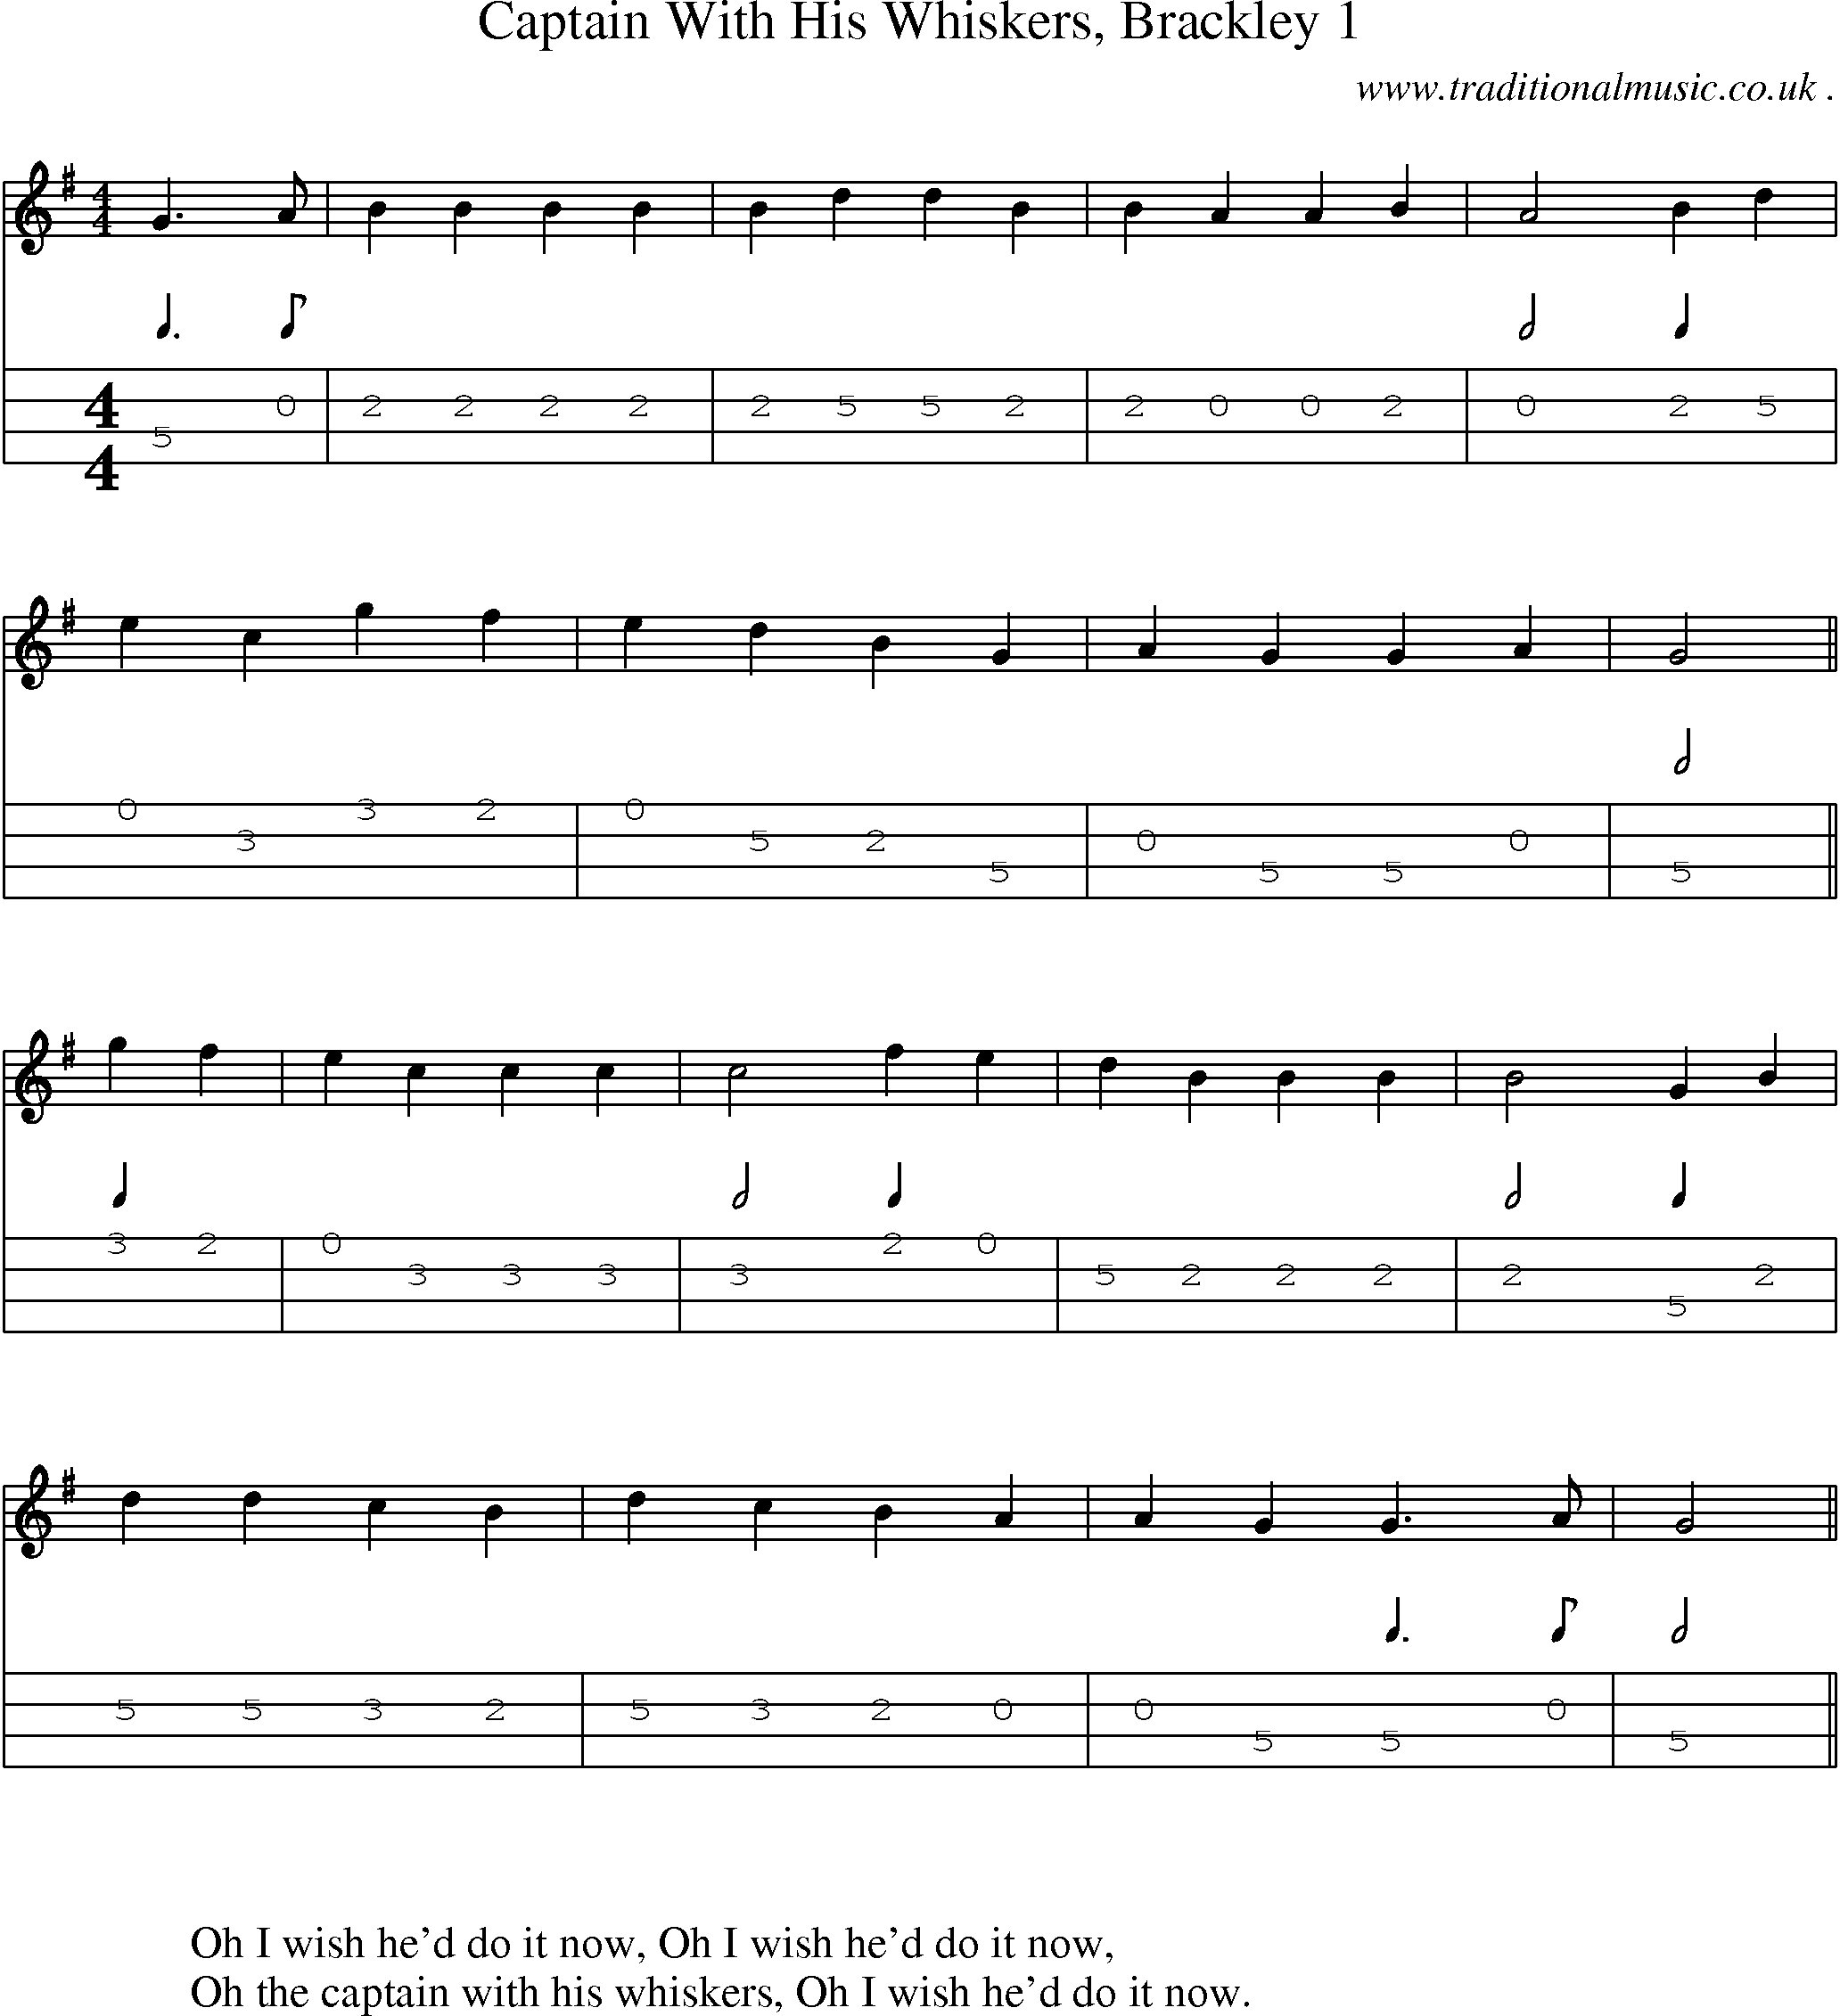 Sheet-Music and Mandolin Tabs for Captain With His Whiskers Brackley 1